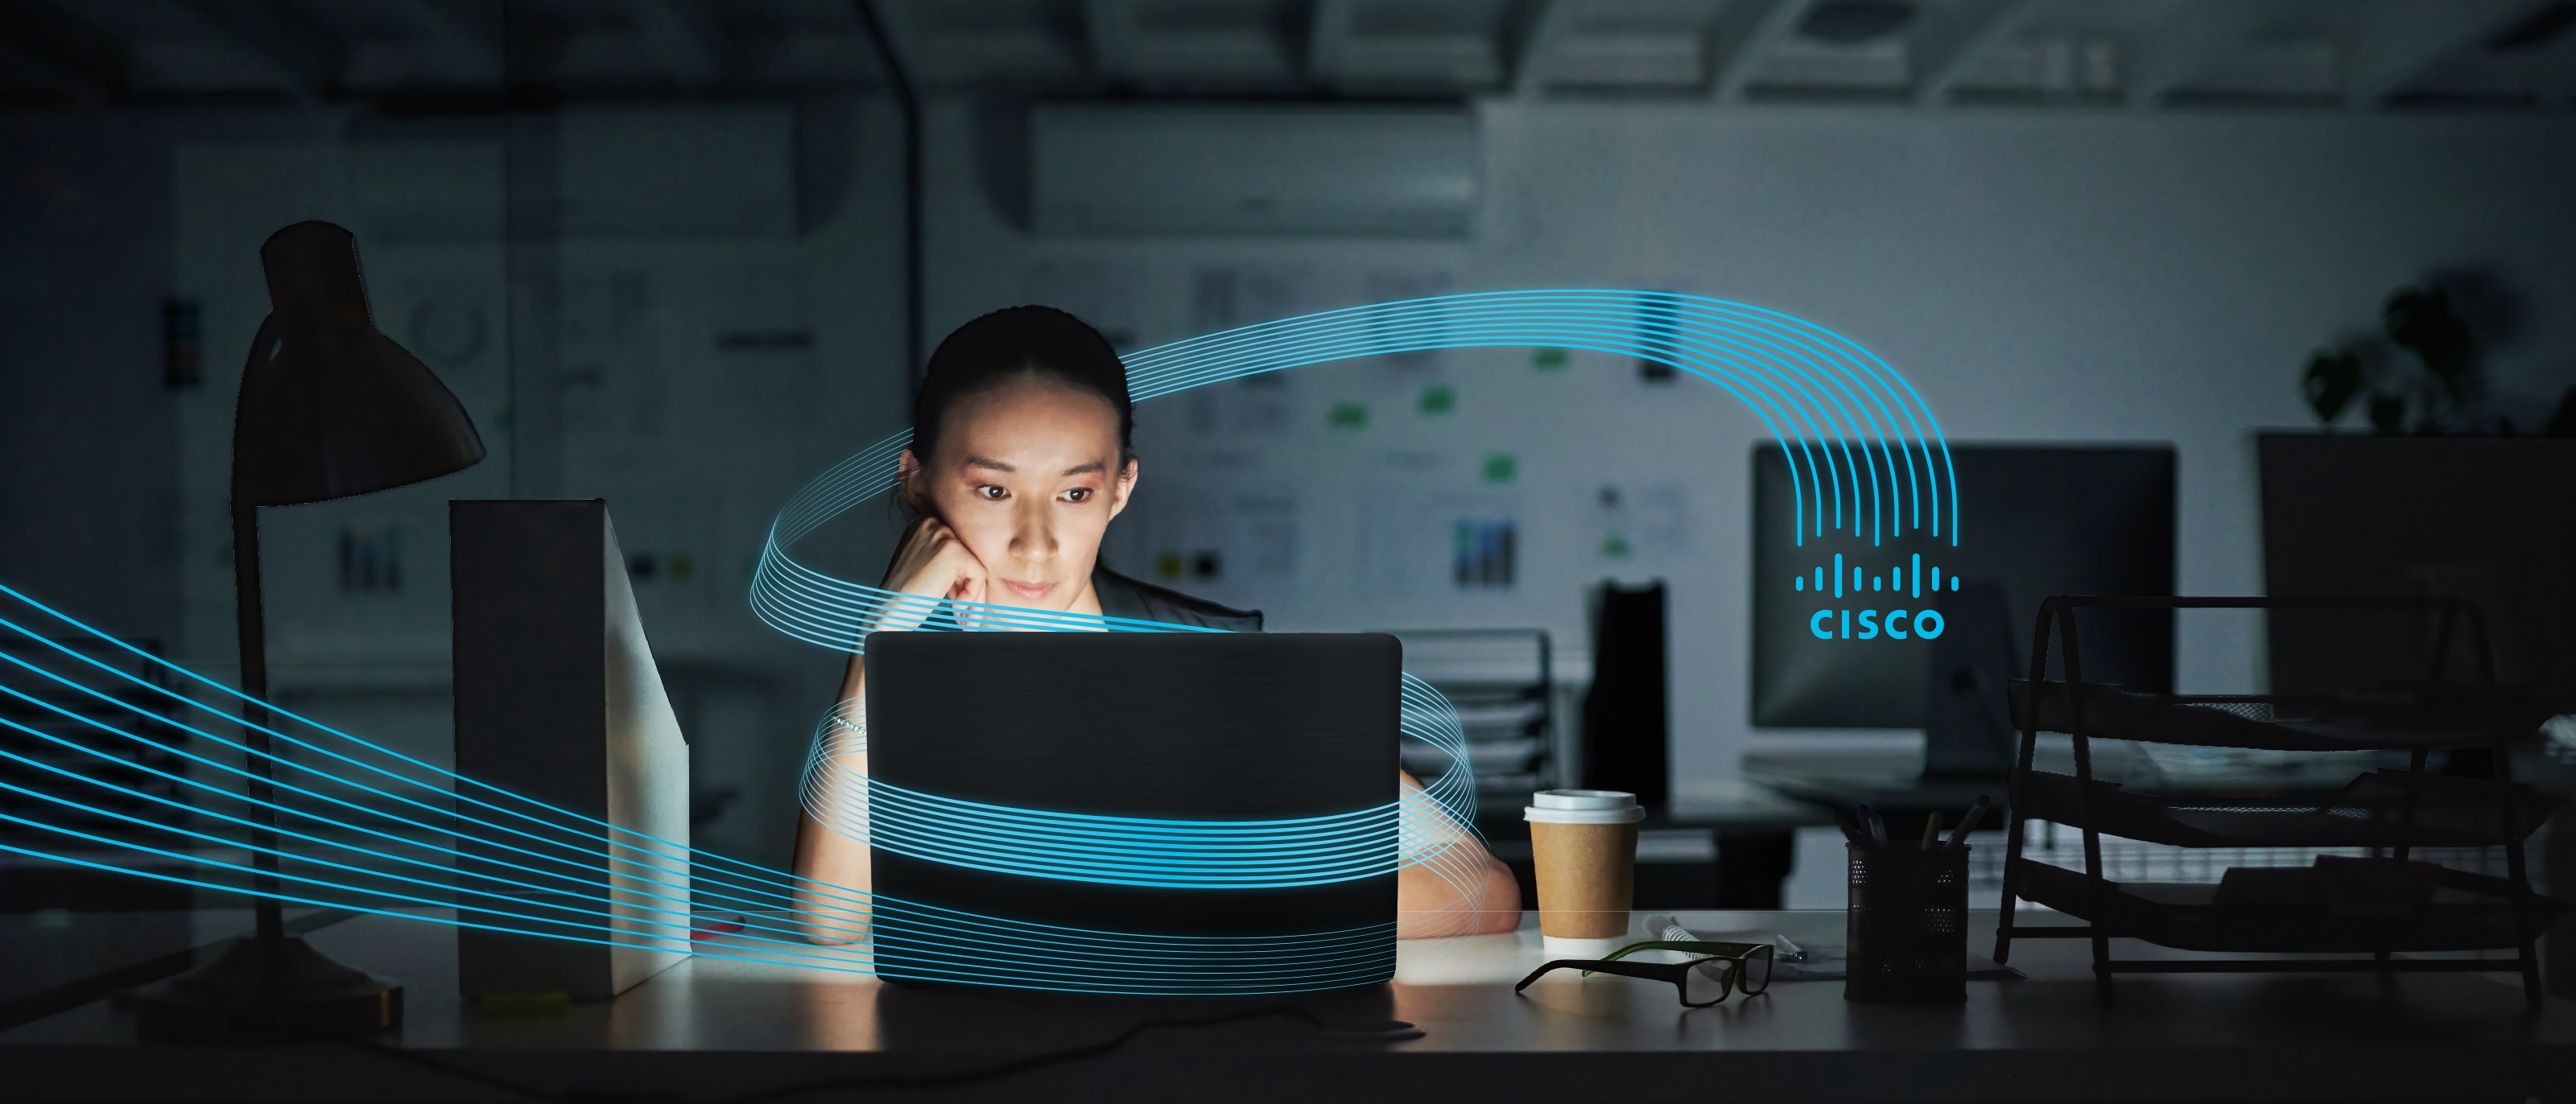 Woman facing forward at glowing laptop with dark background and Cisco logo tines wrapping image.